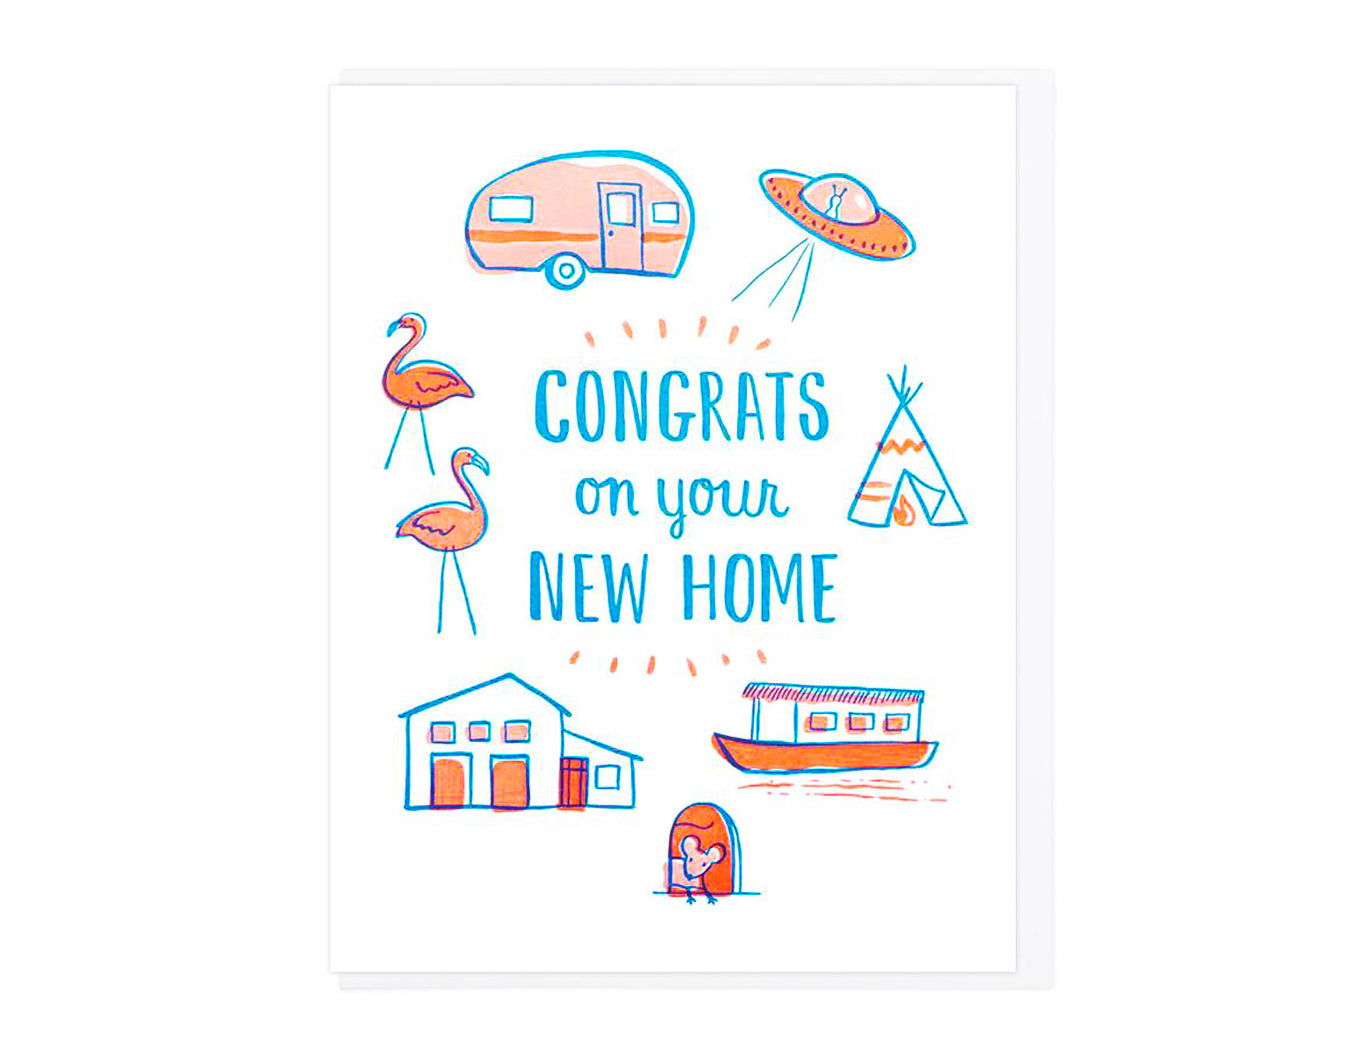 AIRSTREAM TRAILER, UFO, TEEPEE, HOUSE BOAT, MOUSE HOUSE, SINGLE LEVEL HOME, LAWN FLAMINGOS SURROUND THE TEXT CONGRATS ON YOUR NEW HOME